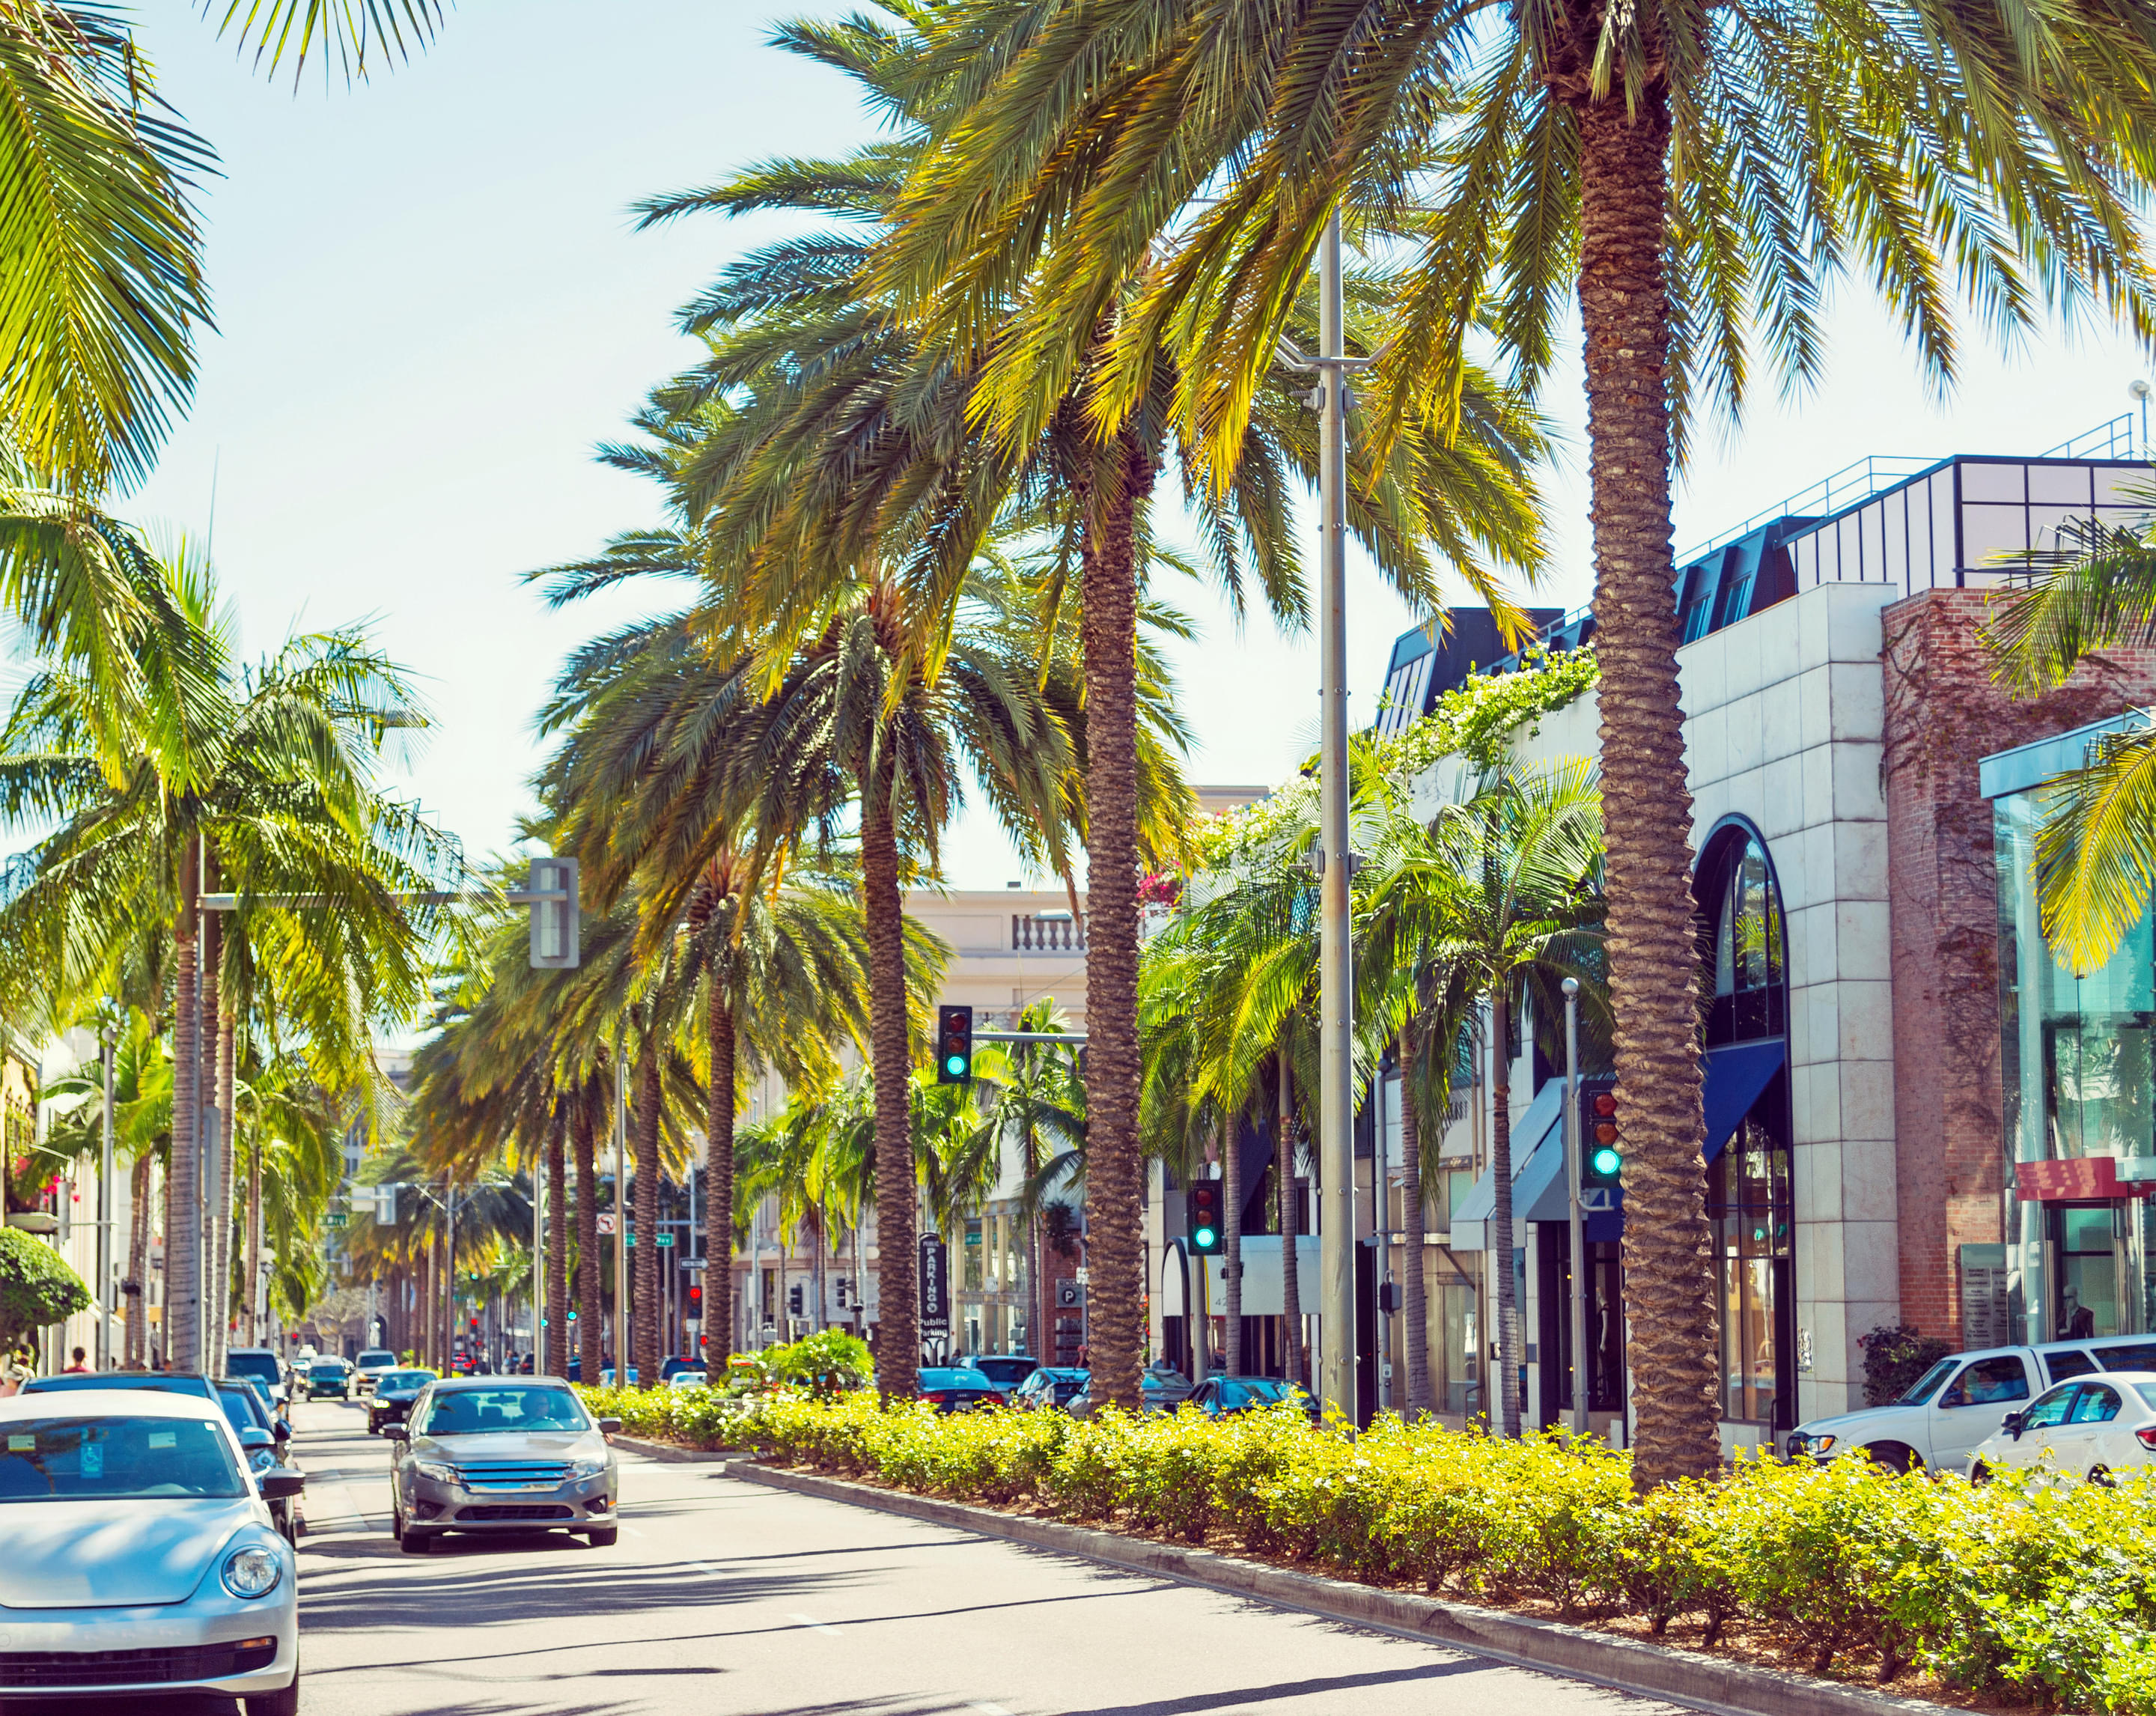 Rodeo Drive Overview